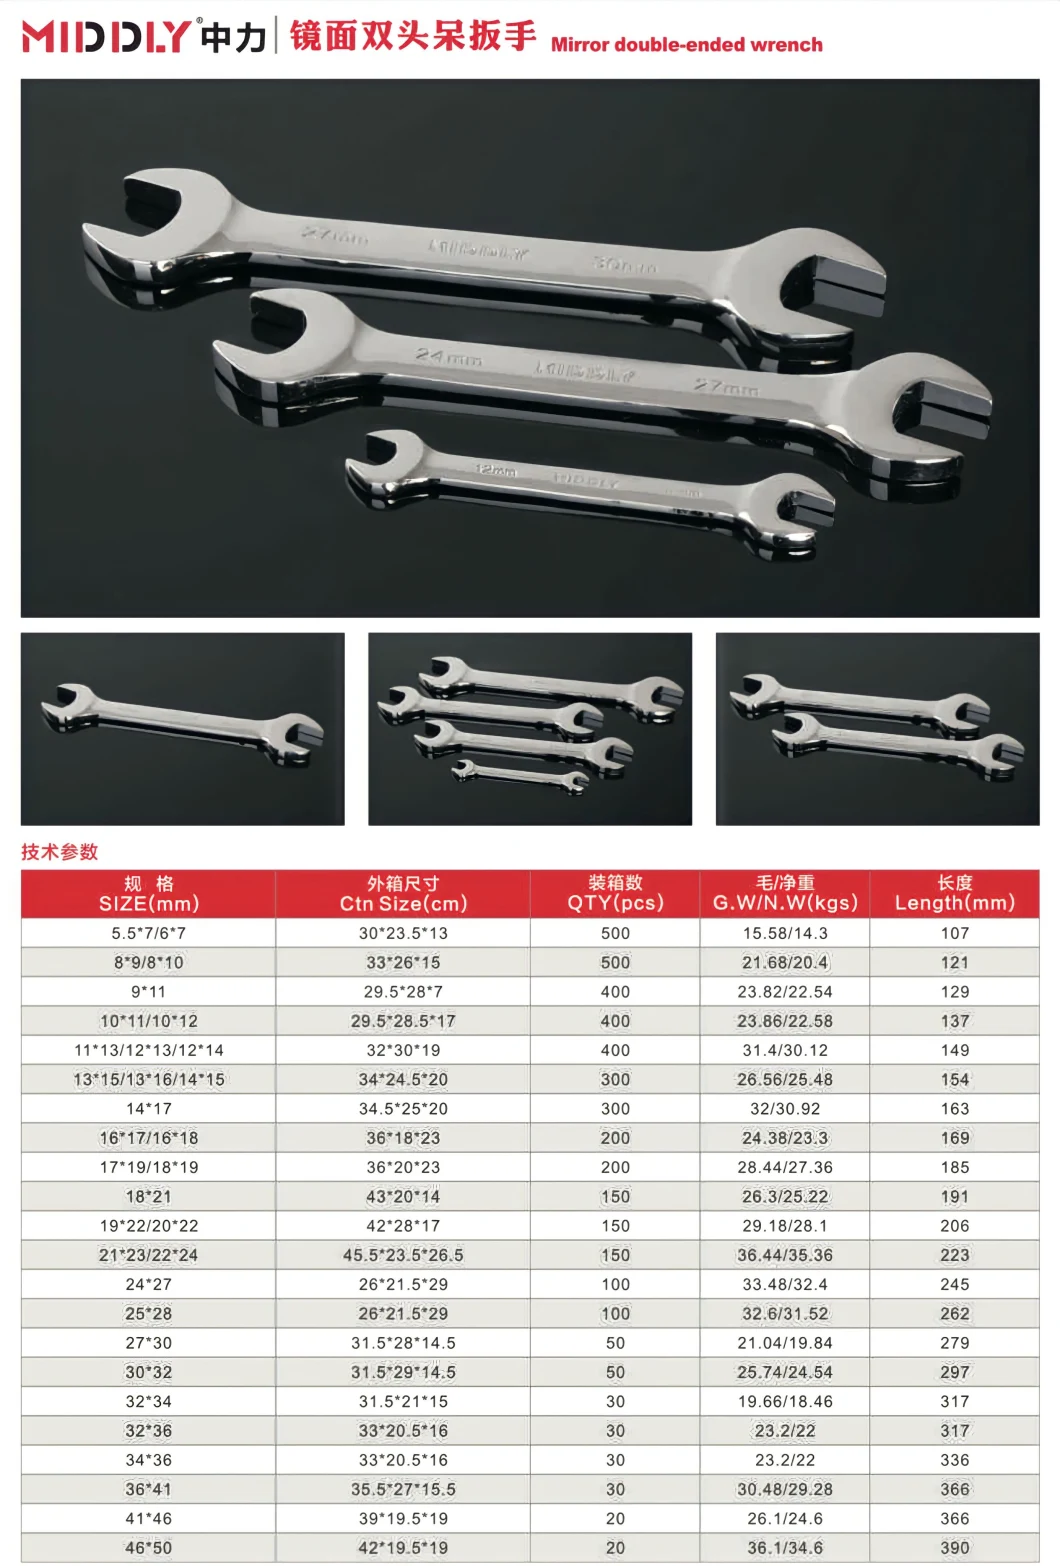 Middly Wrench Set, Double Open-End Wrench, Open Spanner, Cr-V, Mirror/Matt/Black Finish